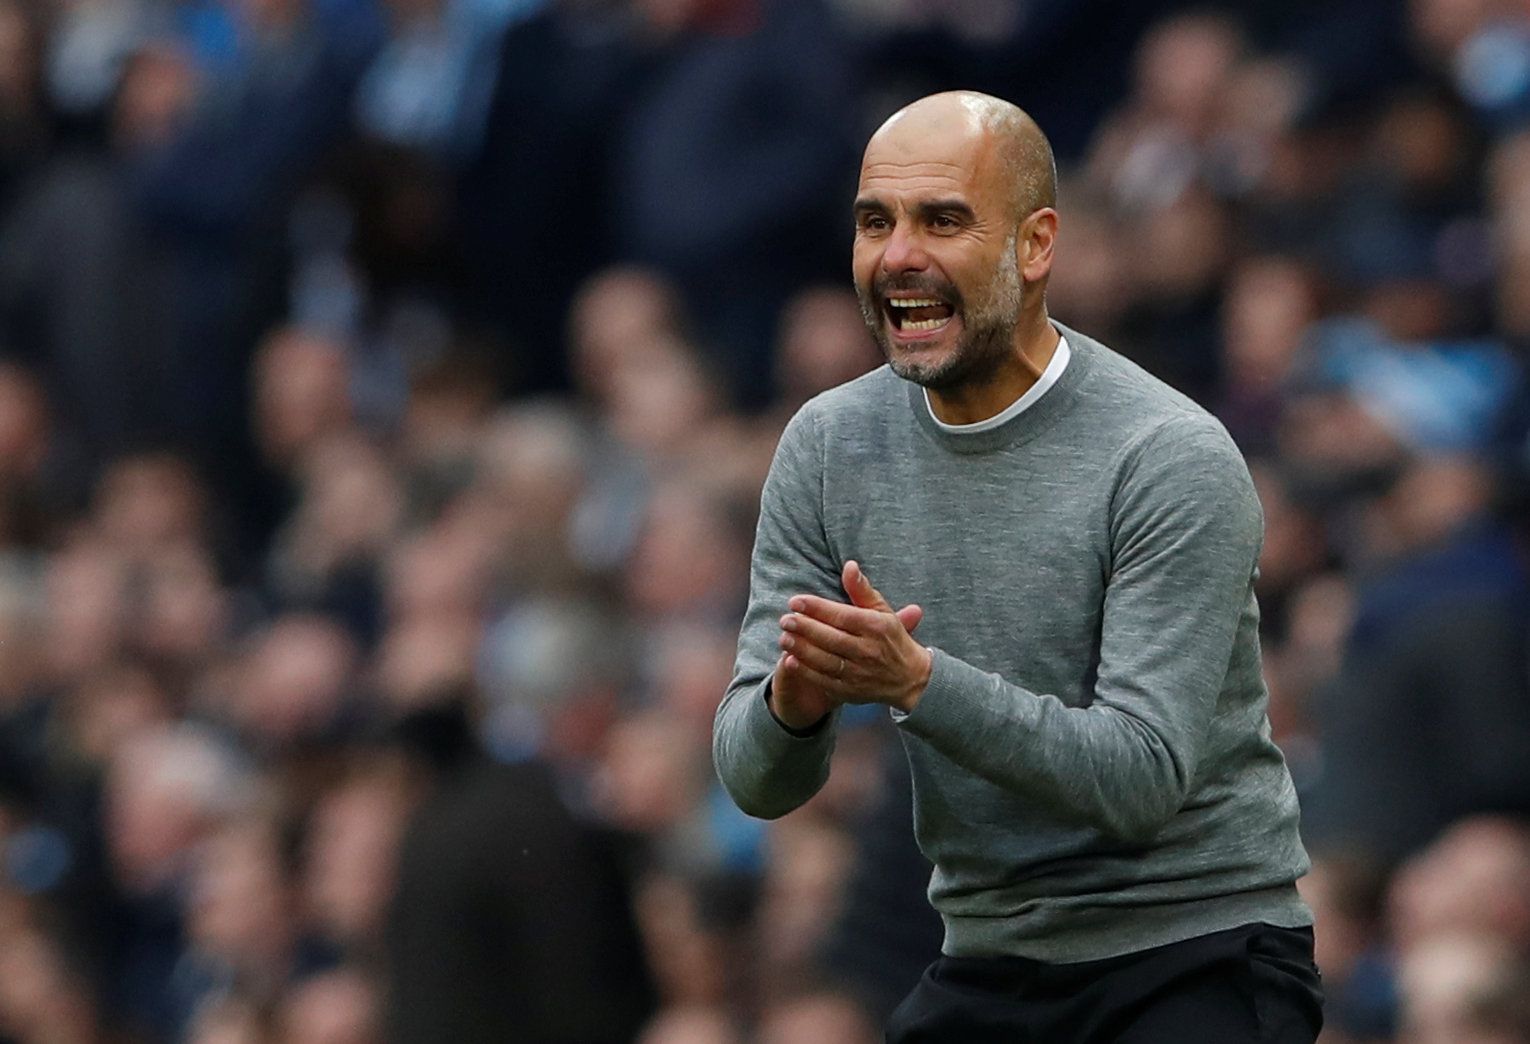 Soccer Football - Premier League - Manchester City vs Manchester United - Etihad Stadium, Manchester, Britain - April 7, 2018   Manchester City manager Pep Guardiola                  Action Images via Reuters/Lee Smith    EDITORIAL USE ONLY. No use with unauthorized audio, video, data, fixture lists, club/league logos or 